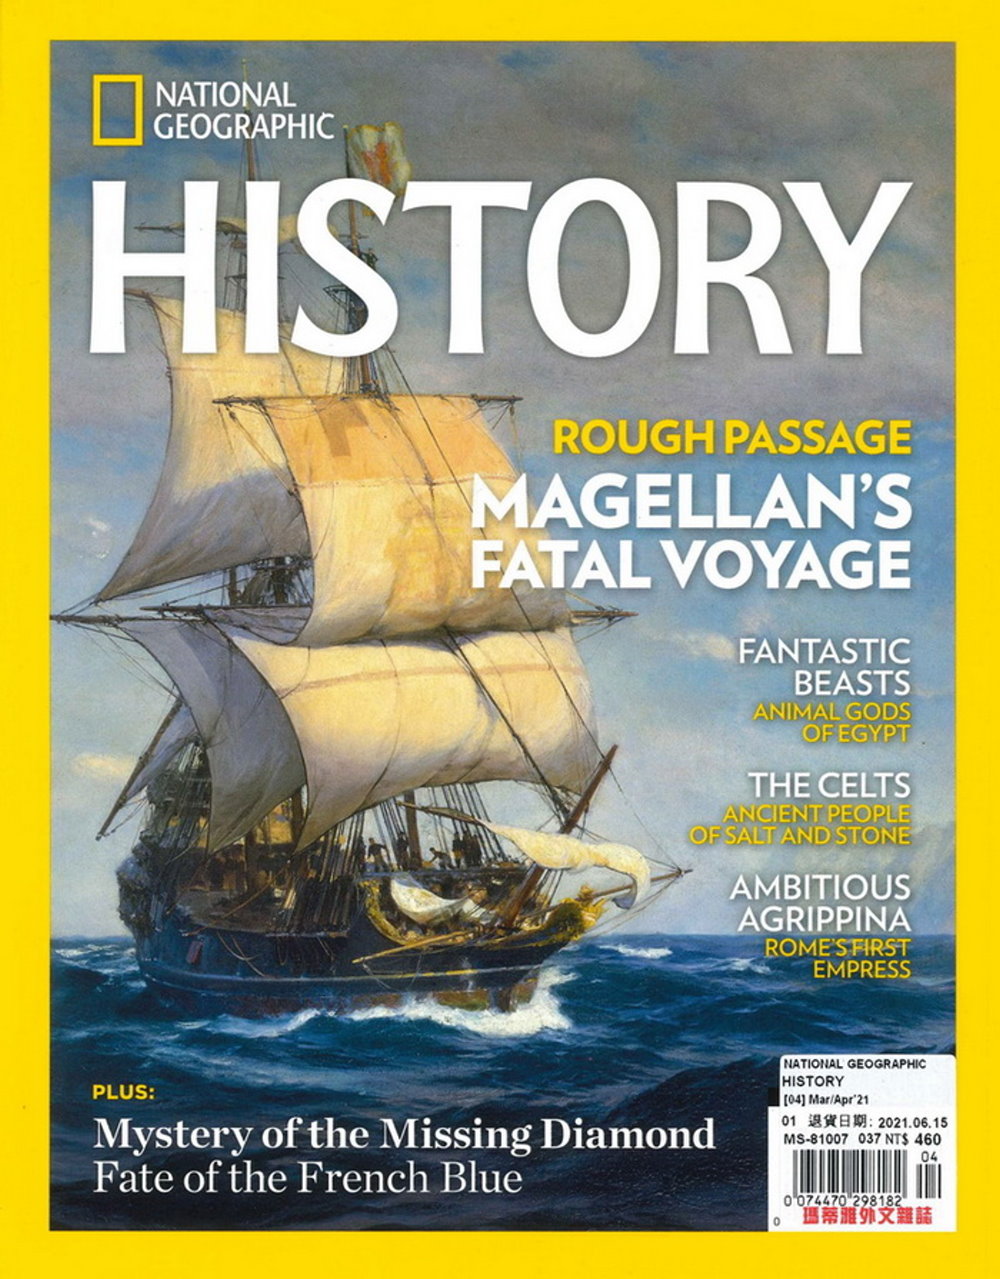 NATIONAL GEOGRAPHIC HISTORY 3-4月號/2021